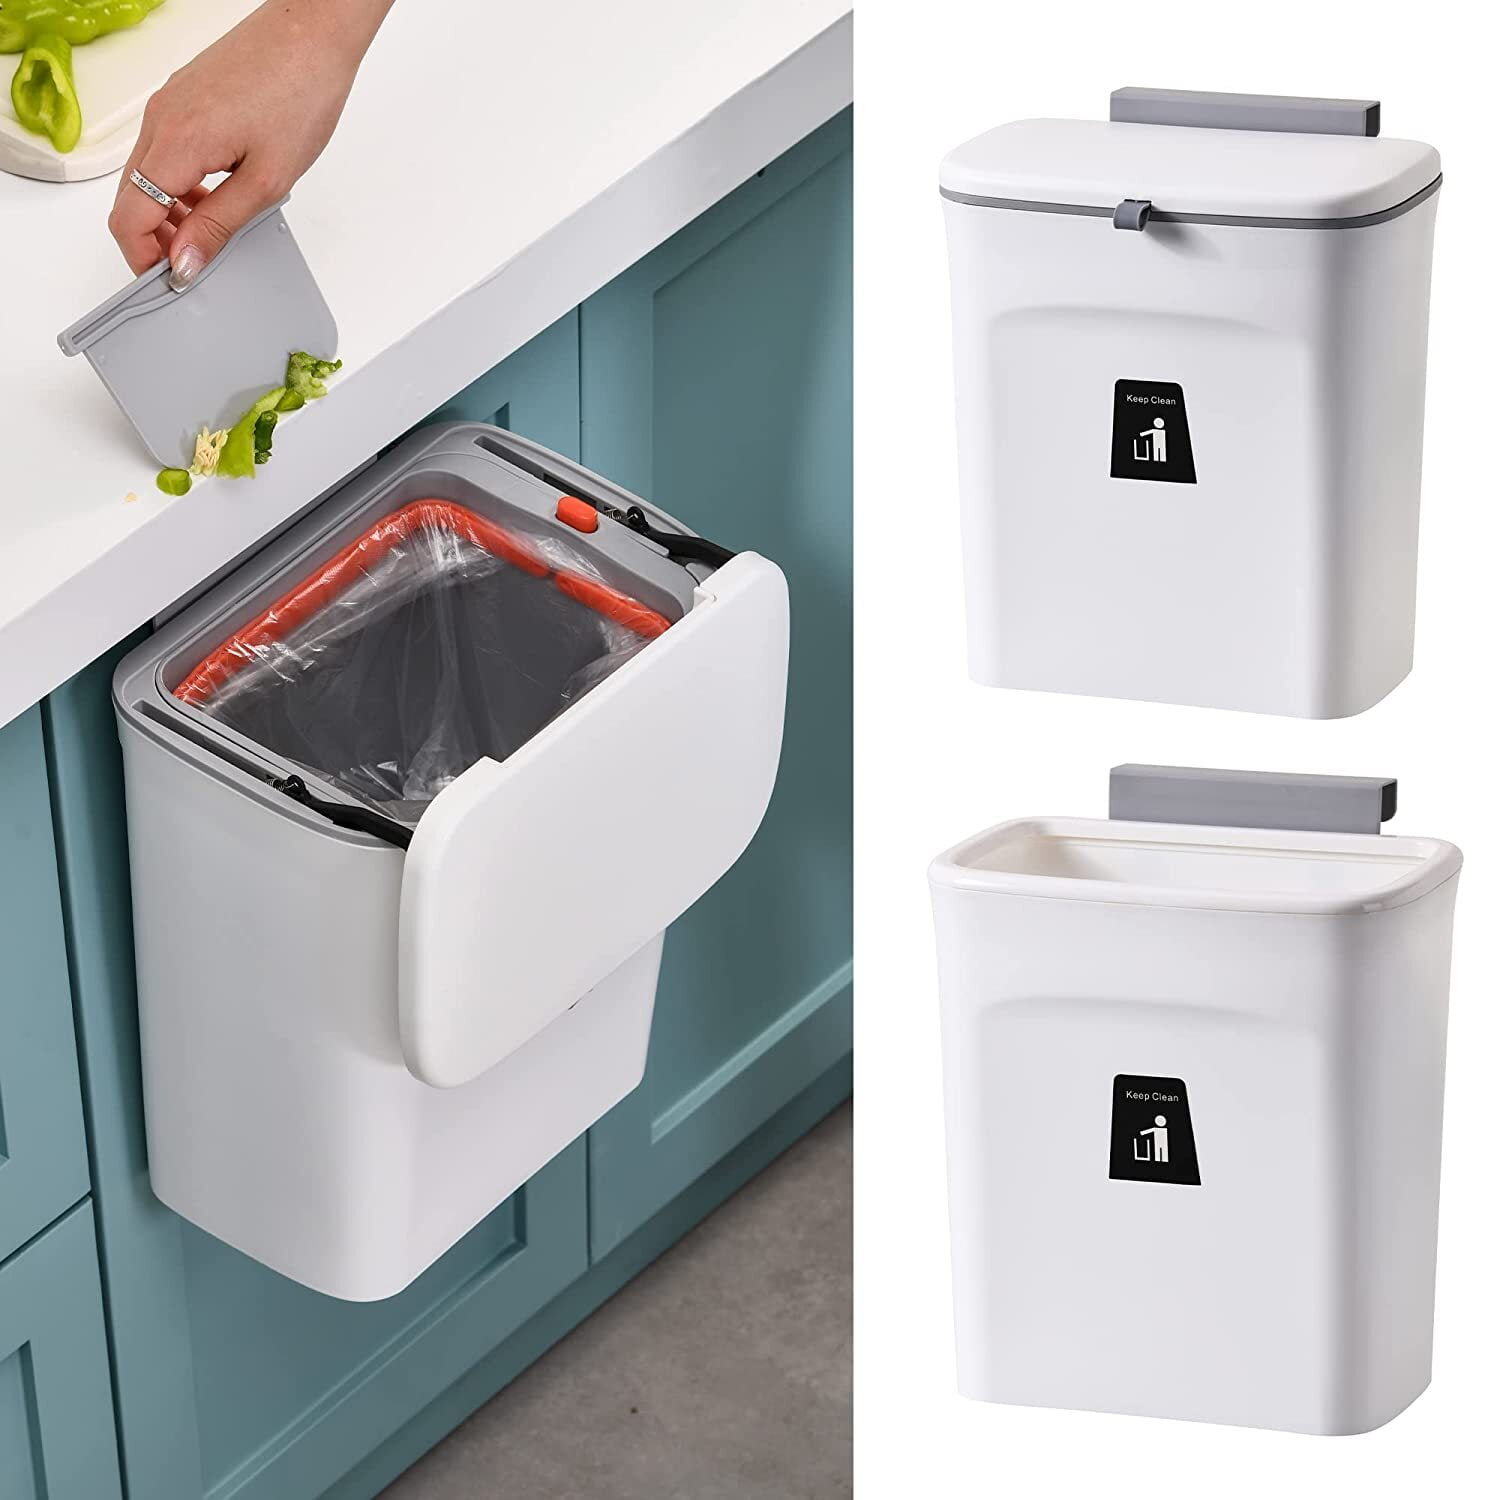 VIGIND 9L/2.4 Gallon Hanging Trash Can for Kitchen Cabinet Door with Lid, Small Under Sink Garbage Can,Trash Bin for Bathroom, Wall Mounted Counter